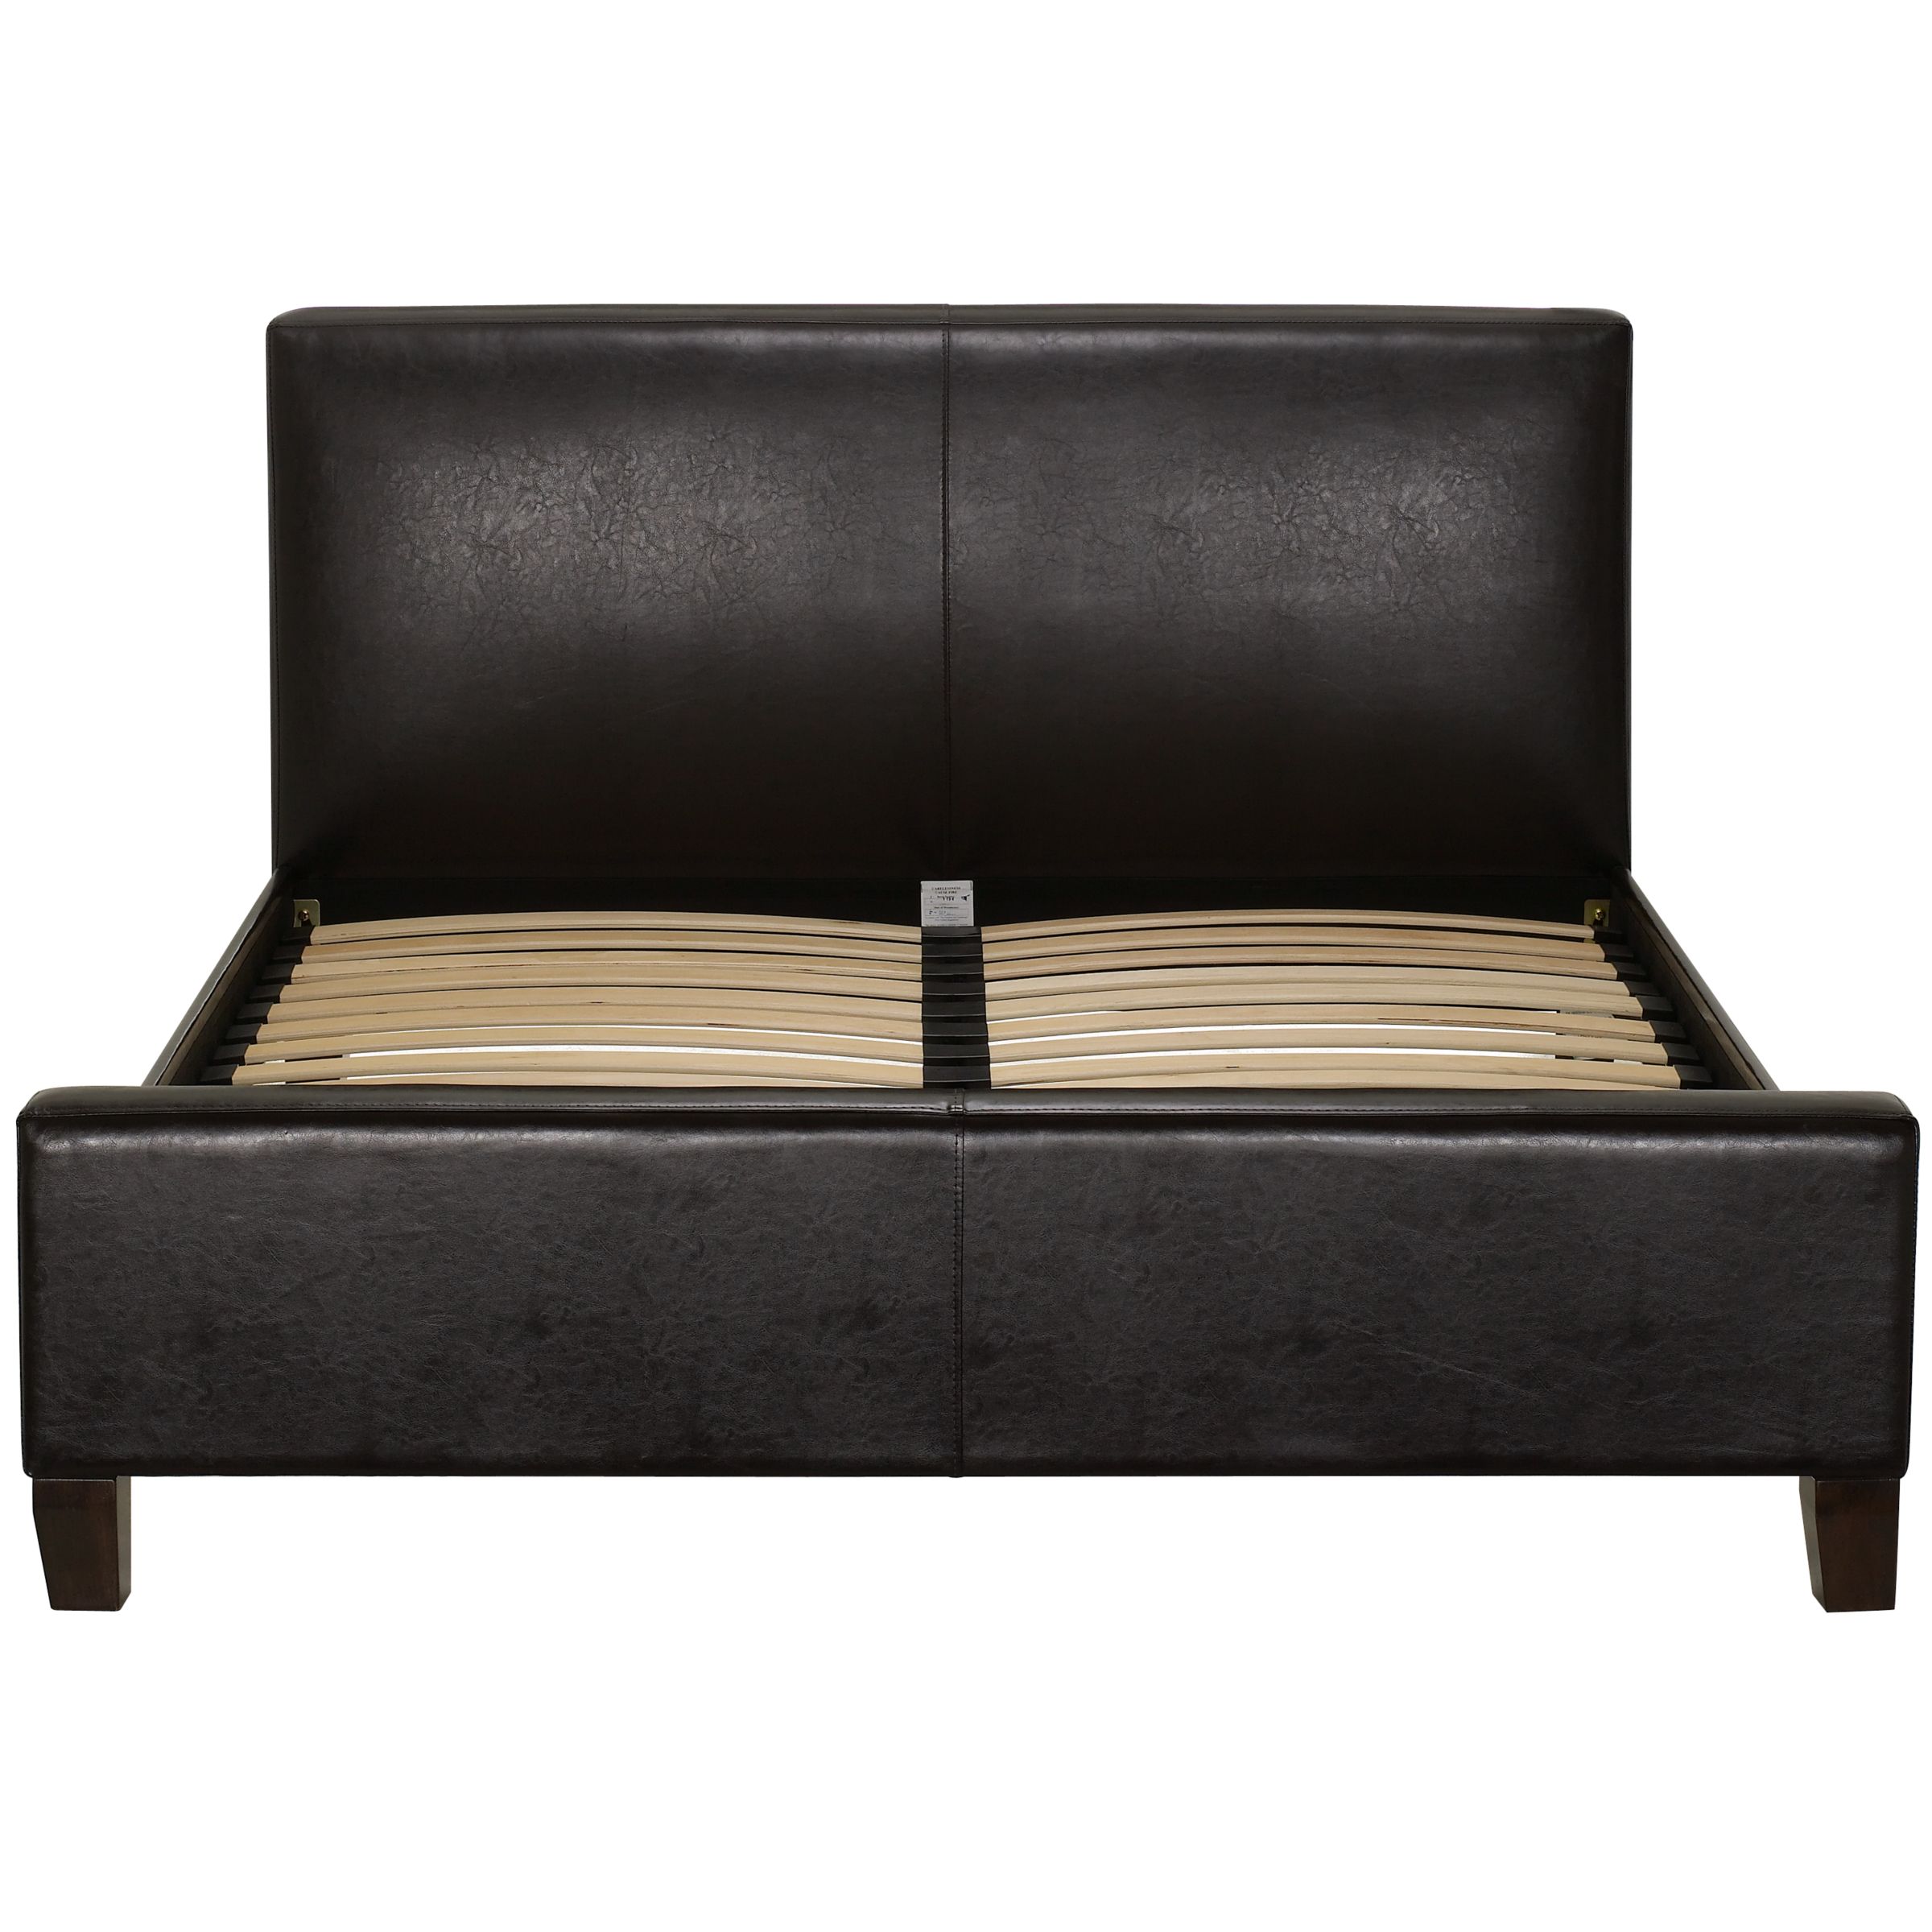 Calabria Faux Leather Bedstead, Chocolate, Double at John Lewis